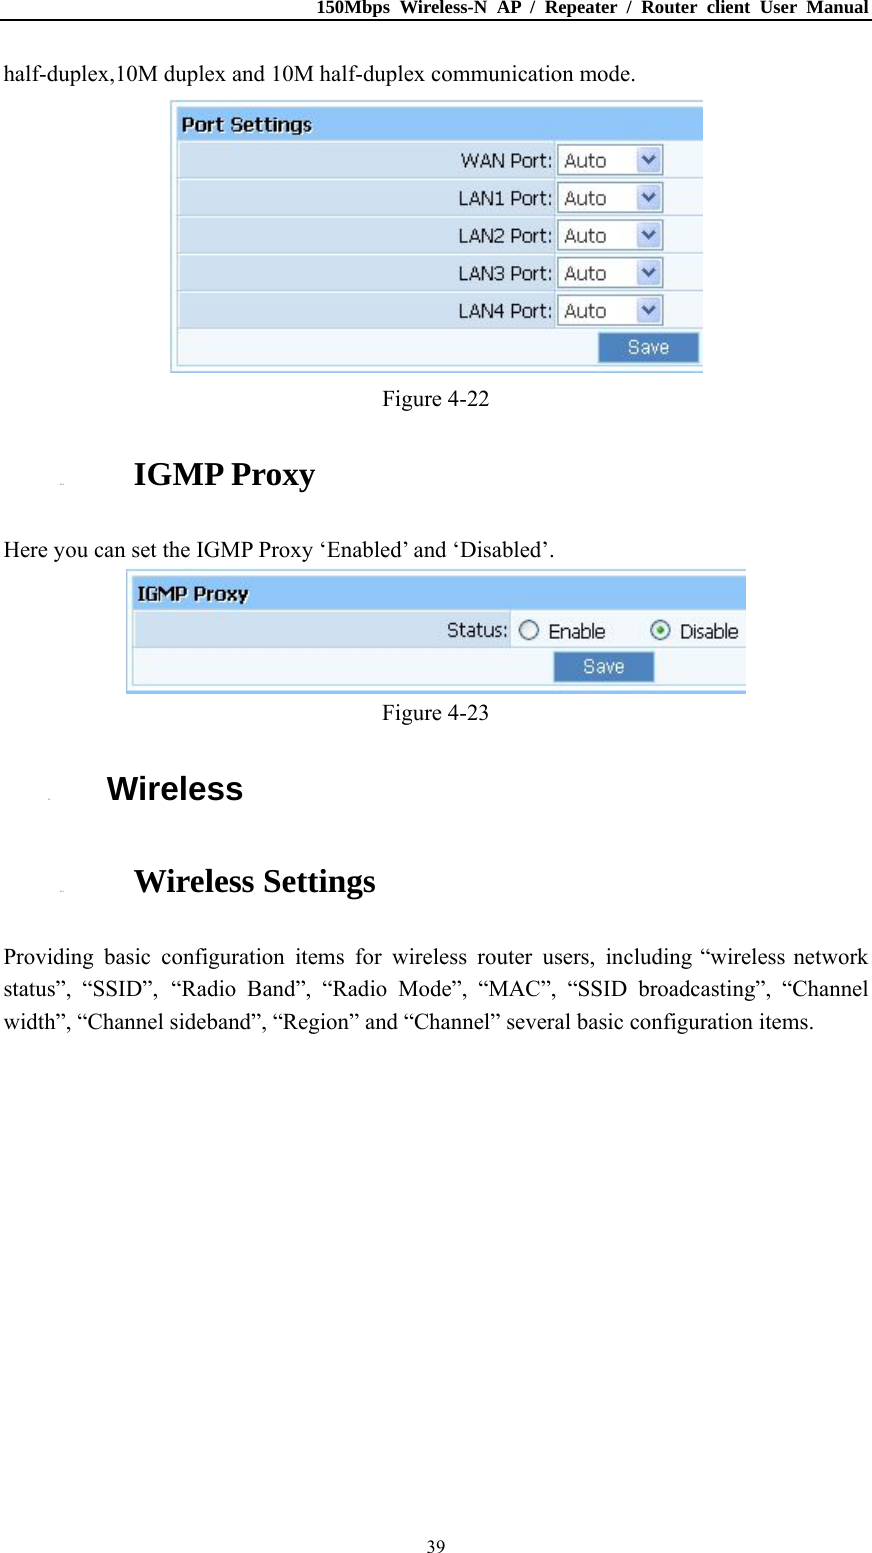 150Mbps Wireless-N AP / Repeater / Router client User Manual  39half-duplex,10M duplex and 10M half-duplex communication mode.  Figure 4-22 4.4.5. IGMP Proxy Here you can set the IGMP Proxy ‘Enabled’ and ‘Disabled’.  Figure 4-23 4.5. Wireless 4.5.1. Wireless Settings Providing basic configuration items for wireless router users, including “wireless network status”, “SSID”, “Radio Band”, “Radio Mode”, “MAC”, “SSID broadcasting”, “Channel width”, “Channel sideband”, “Region” and “Channel” several basic configuration items. 